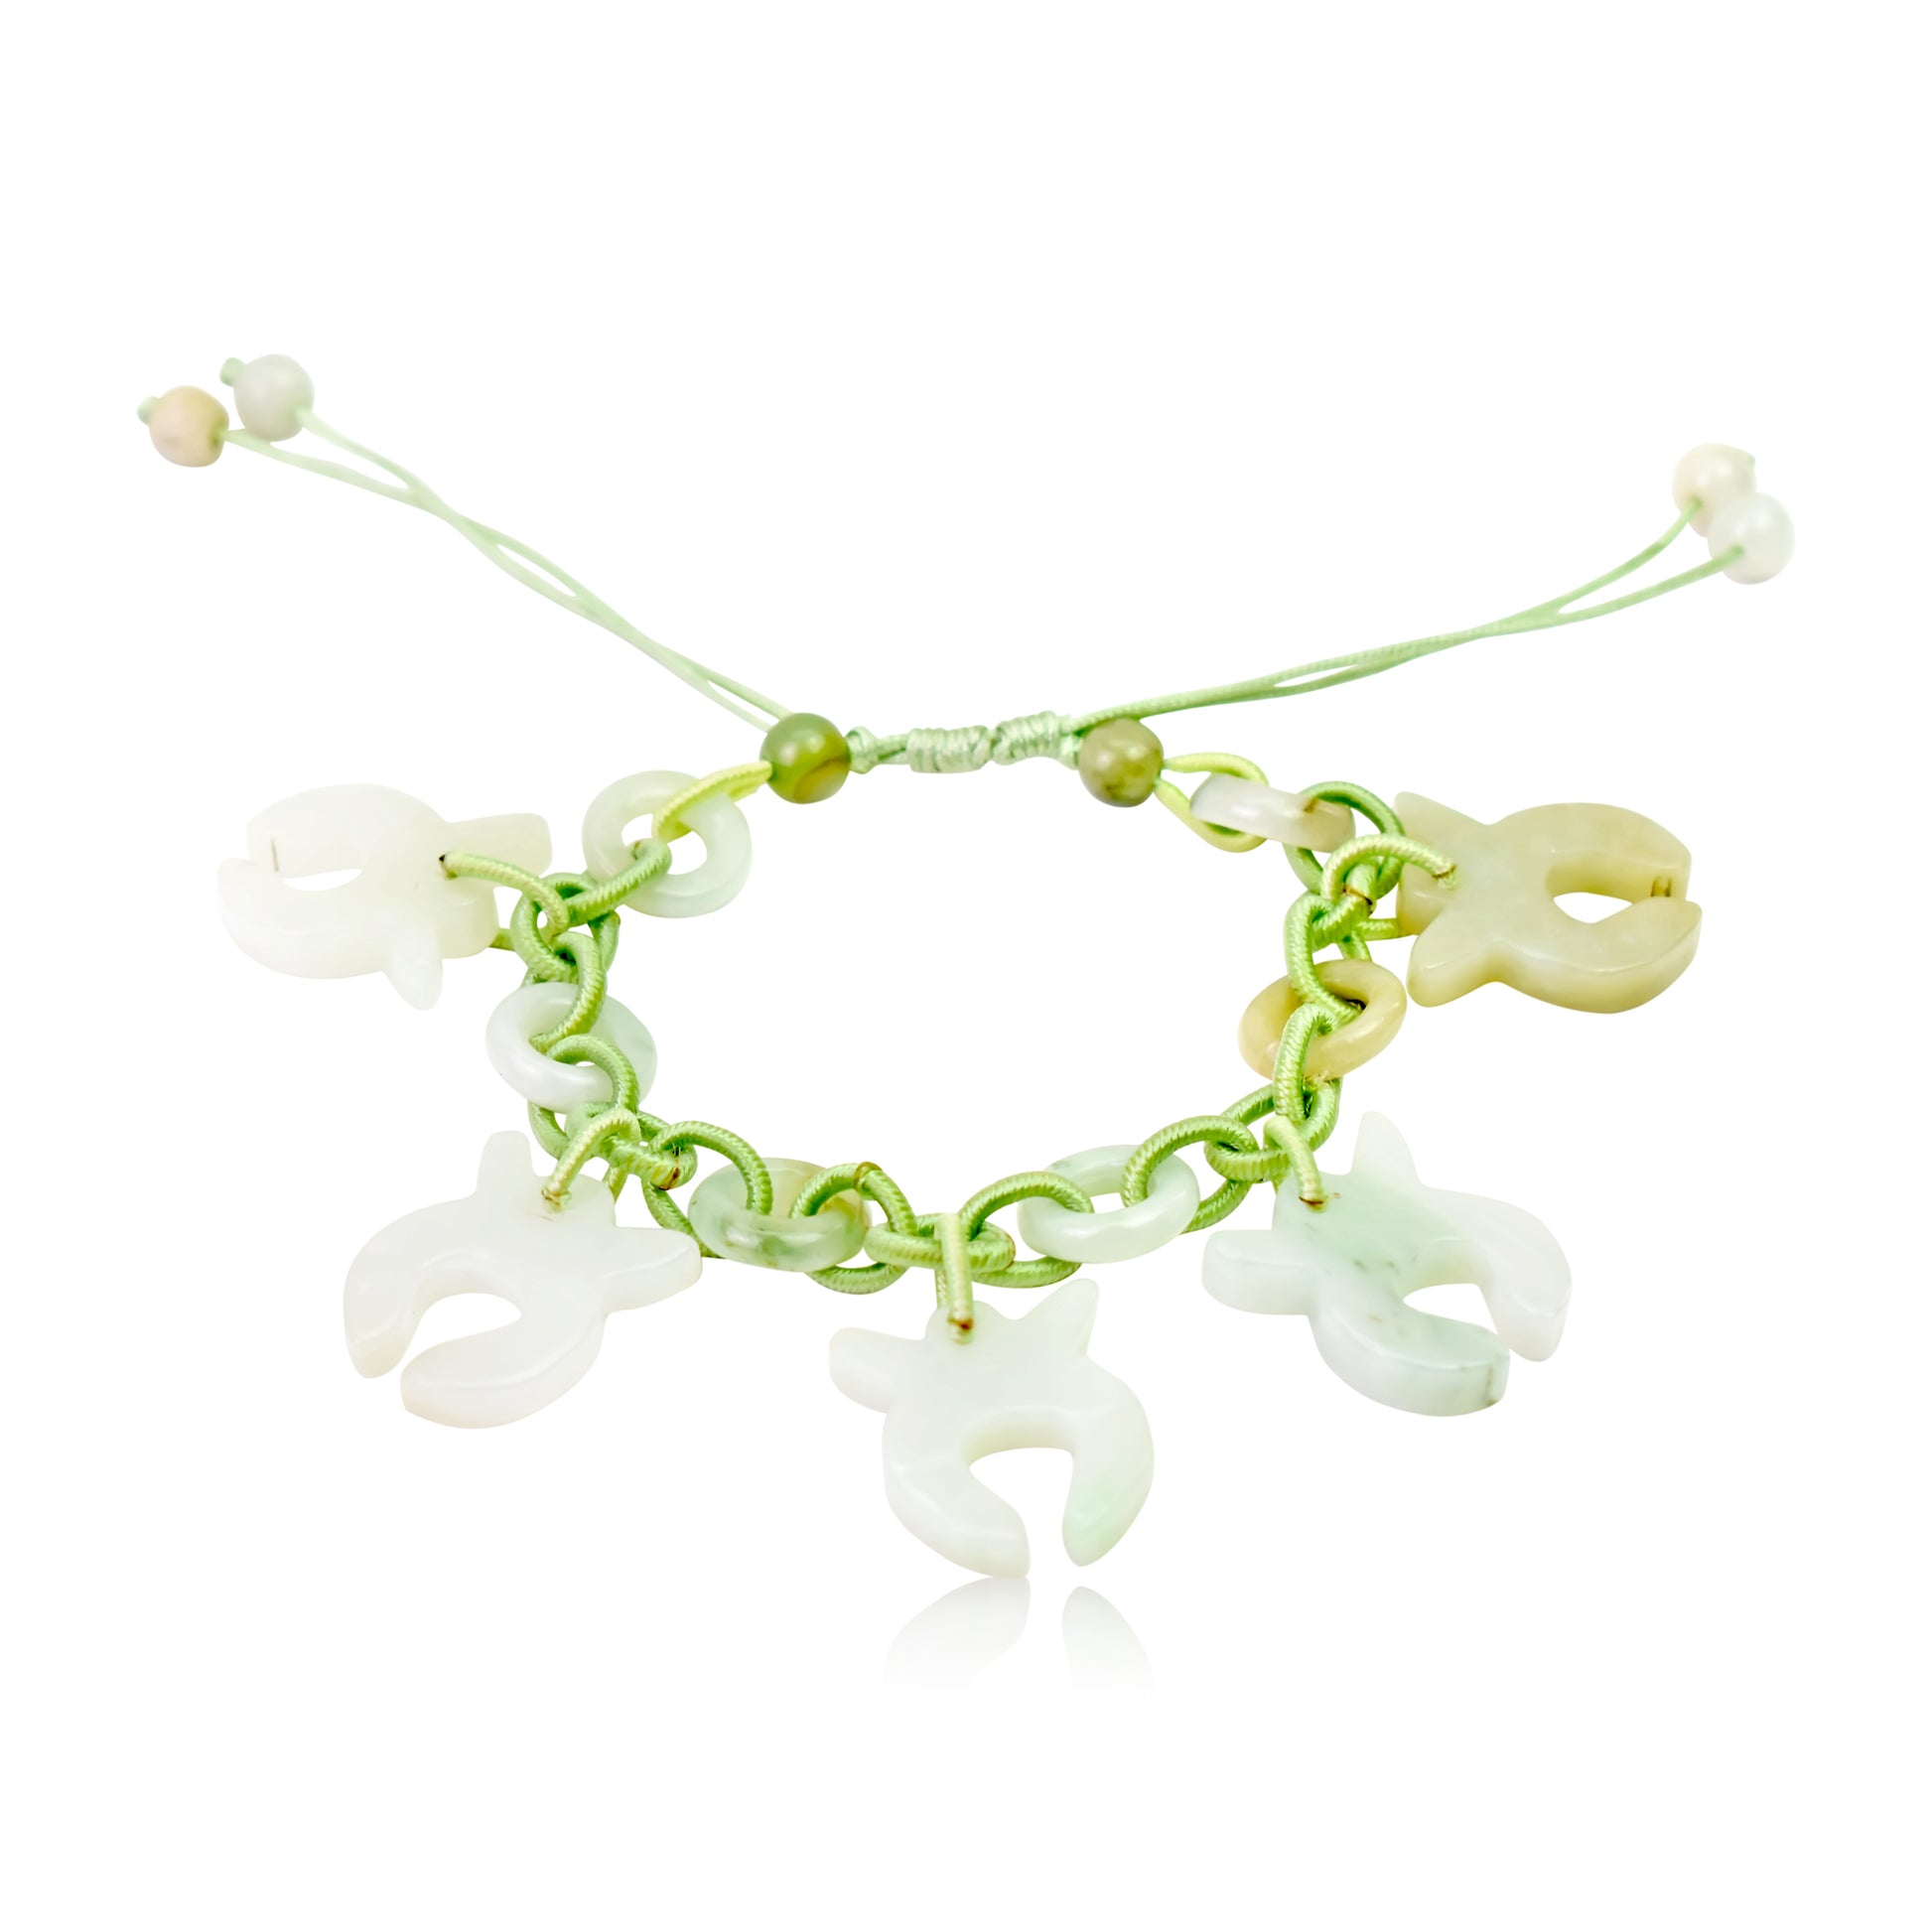 Be Stable and Reliable with a Taurus Astrology Jade Bracelet made with Sea Green Cord